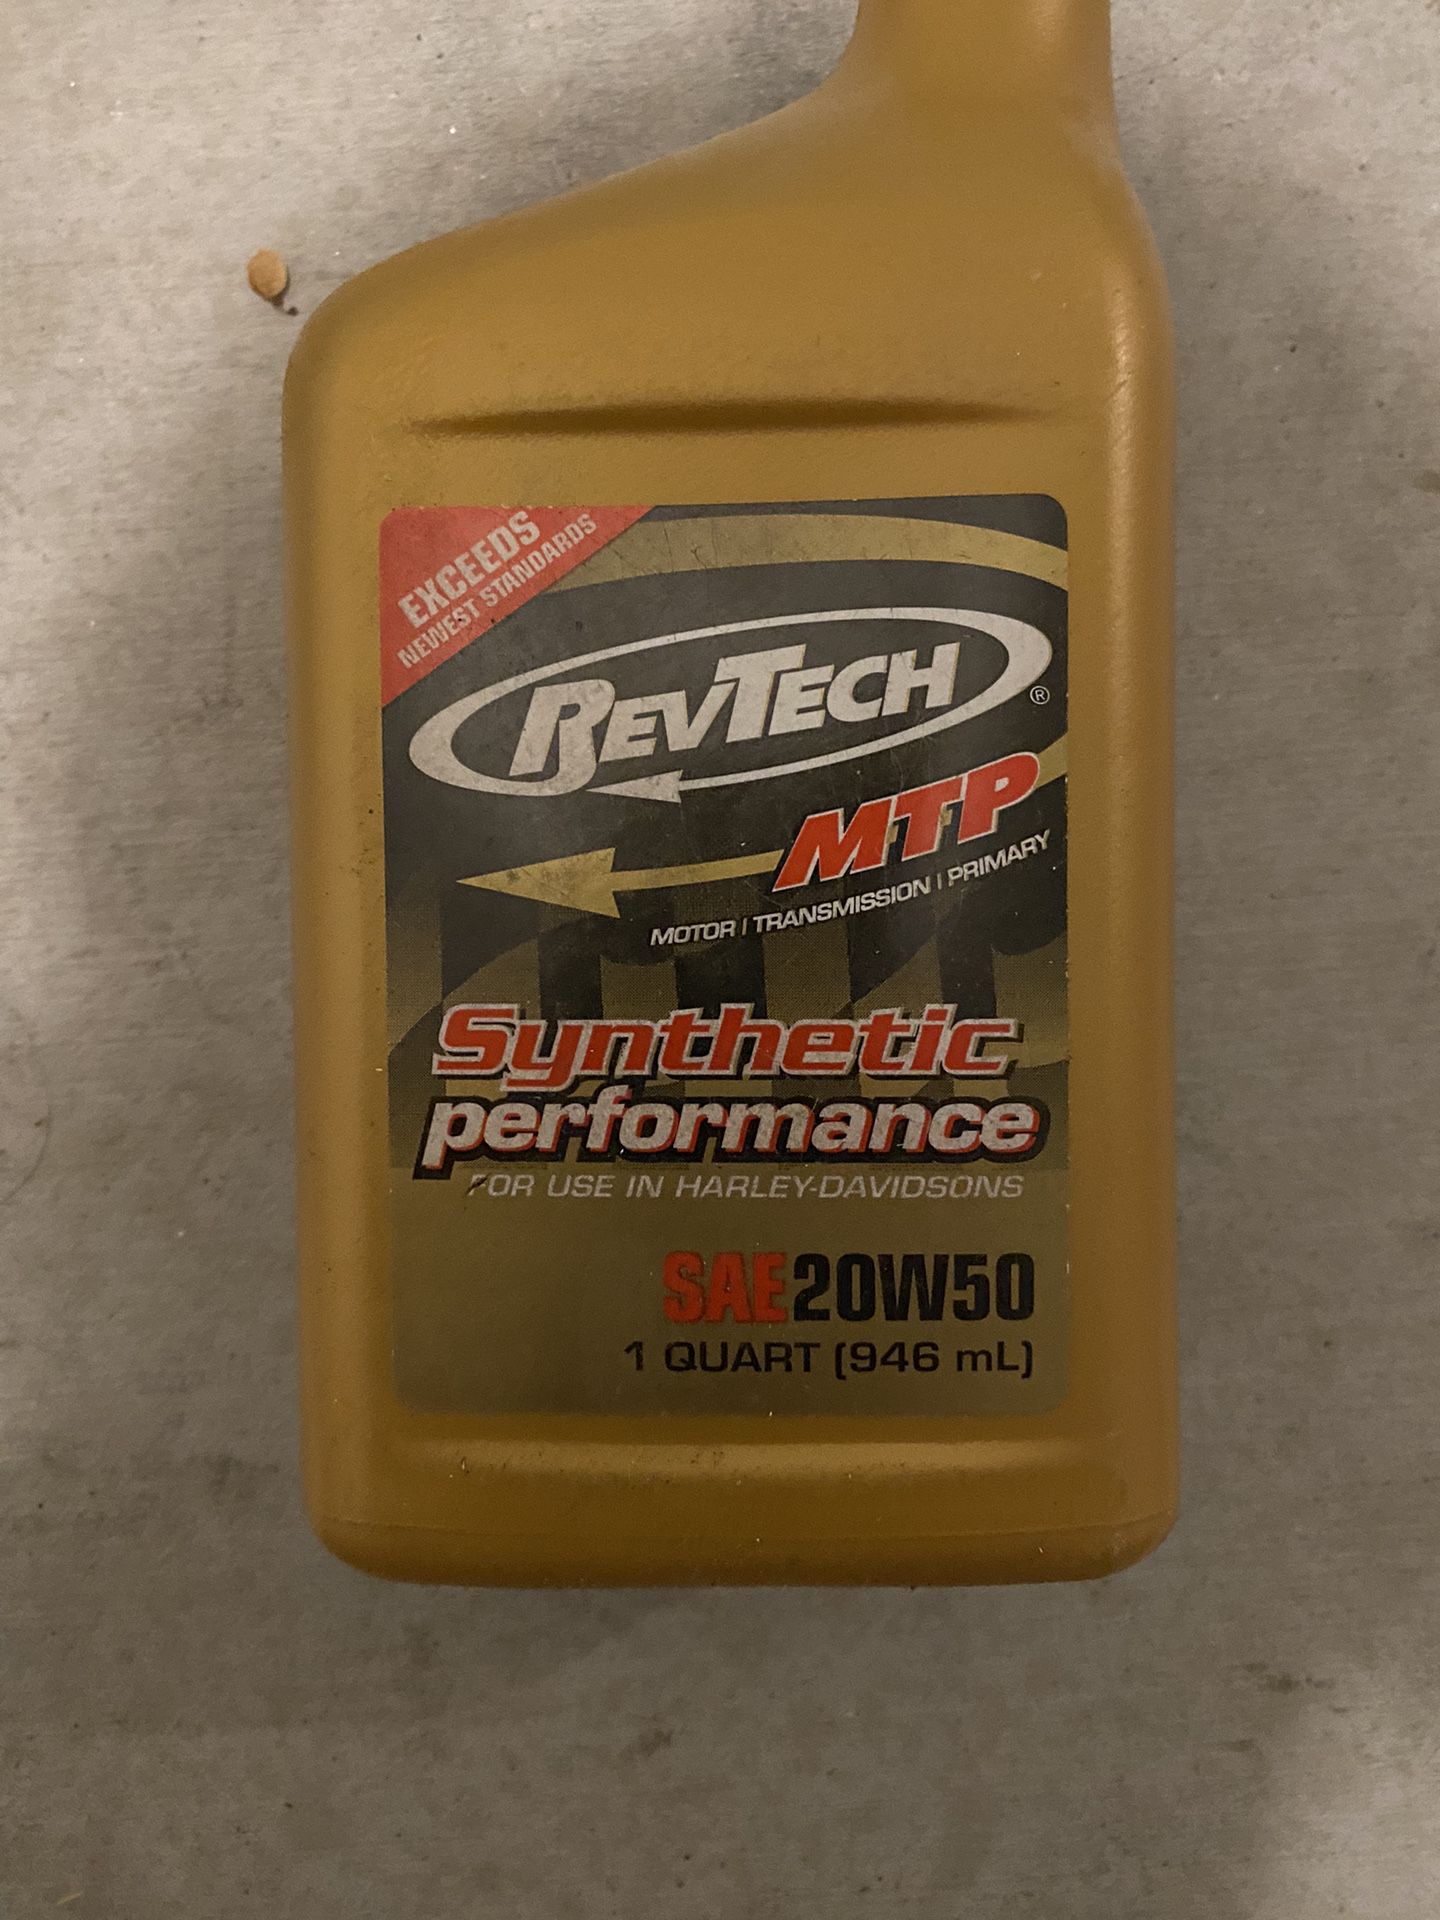 HARLEY DAVIDSON OIL AND LUBRICANT